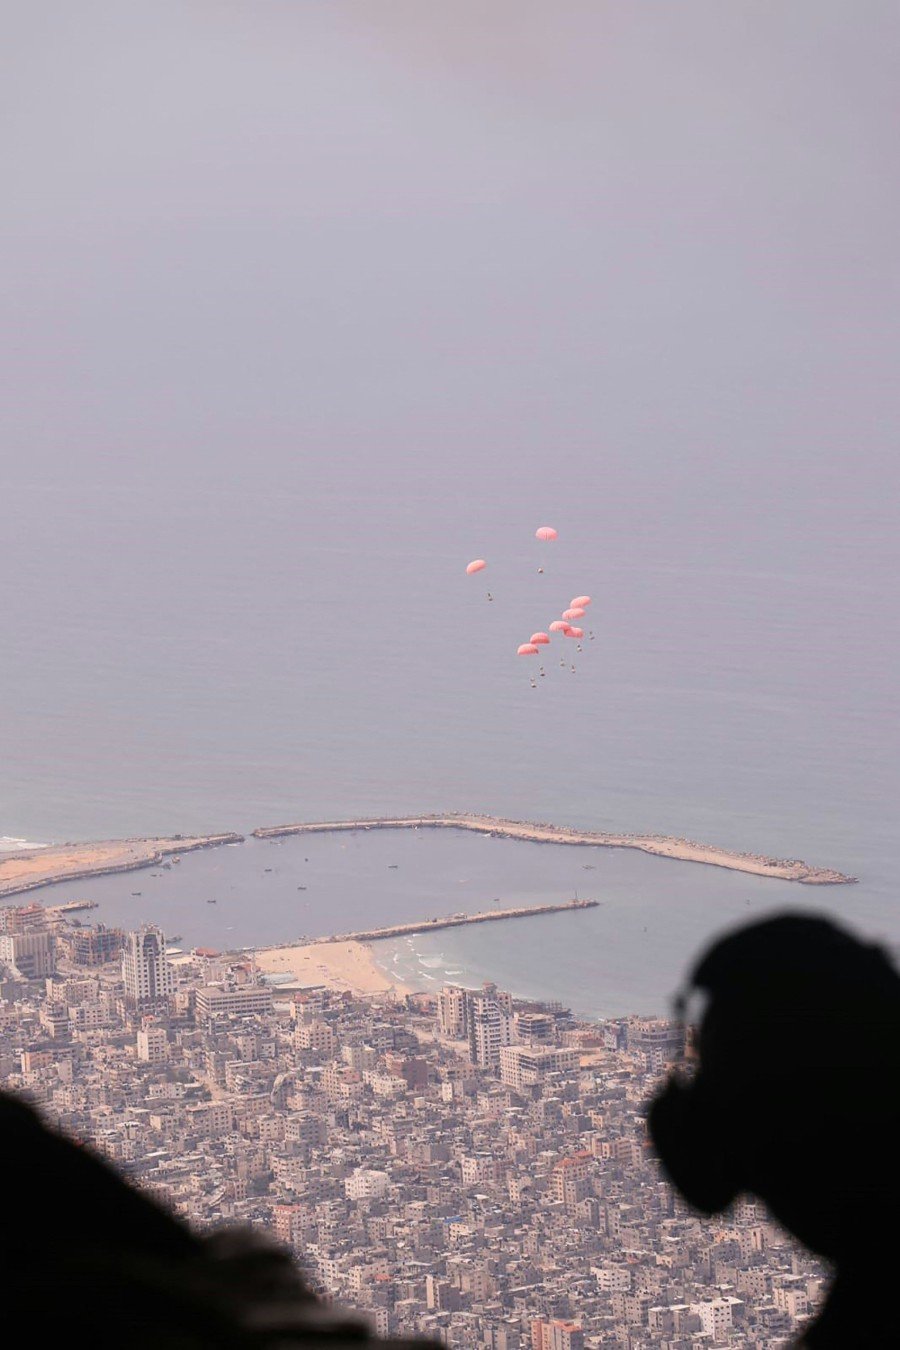 This handout picture released by the Jordanian army yesterday (March 16), shows humanitarian parcels being dropped from a German military aircraft over the northern Gaza Strip, amid the ongoing conflict between Israel and the Palestinian Hamas movement. — AFP